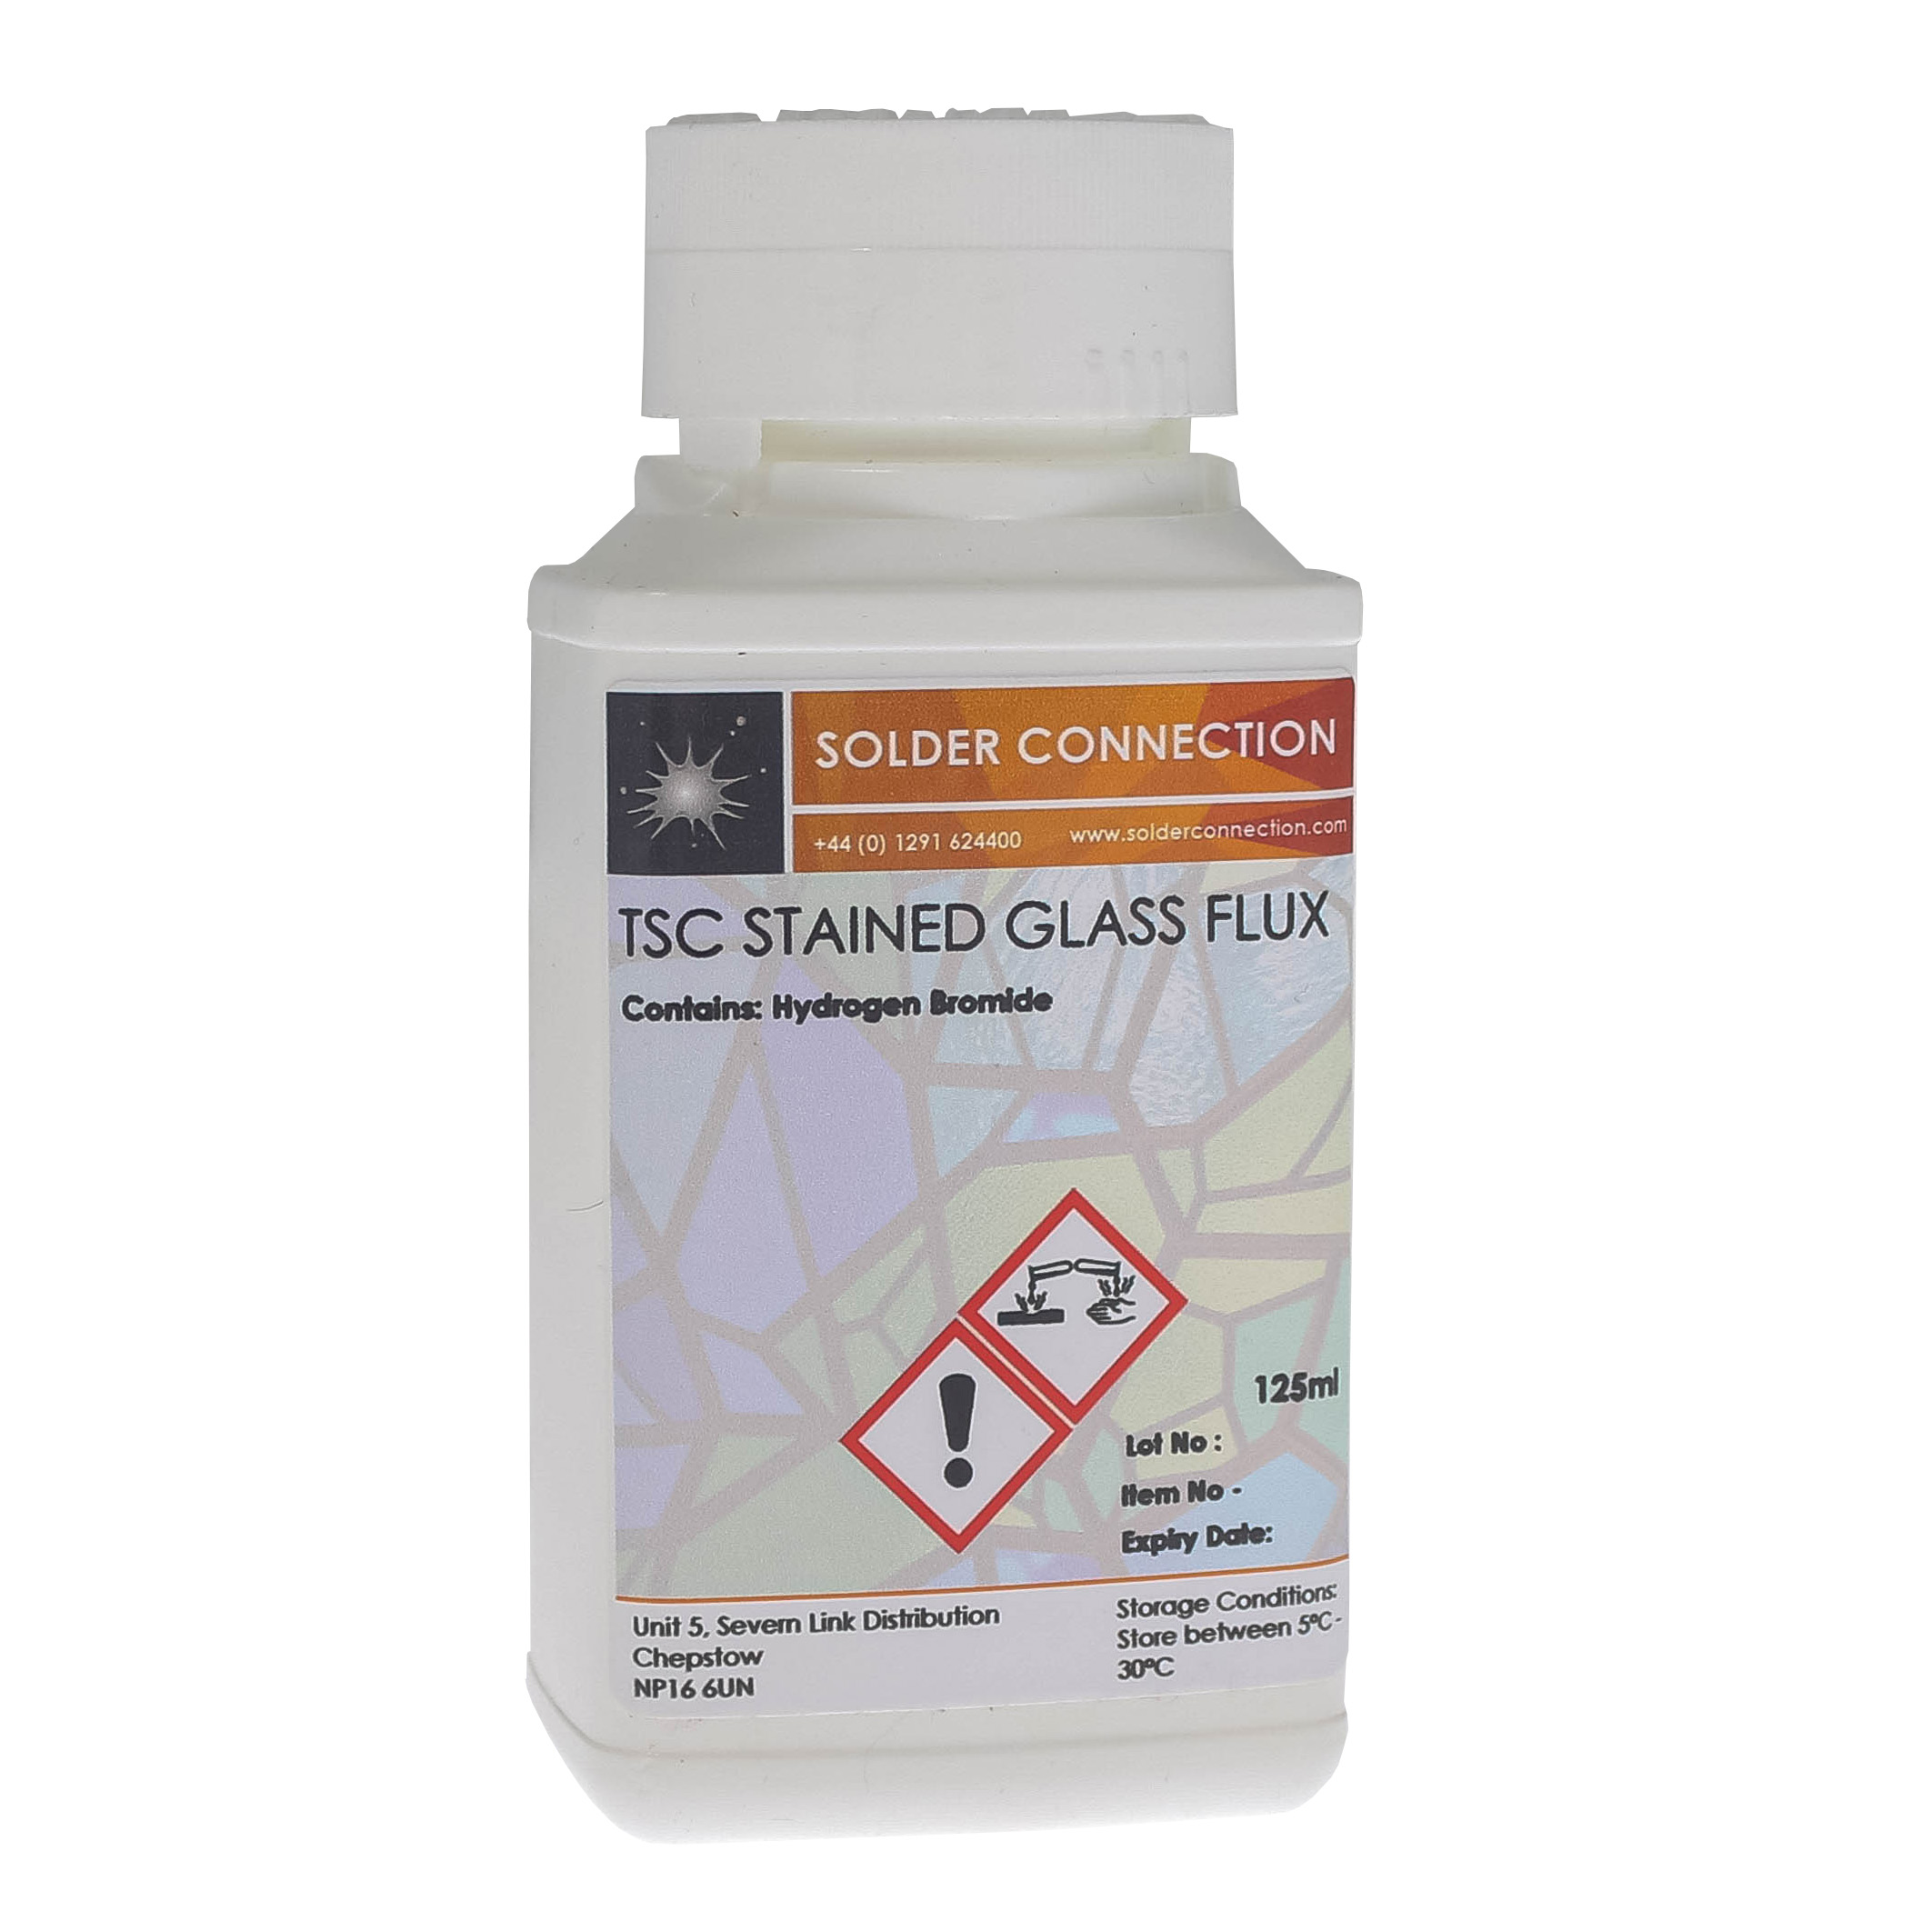 TSC STAINED GLASS FLUX - Solders & Fluxes